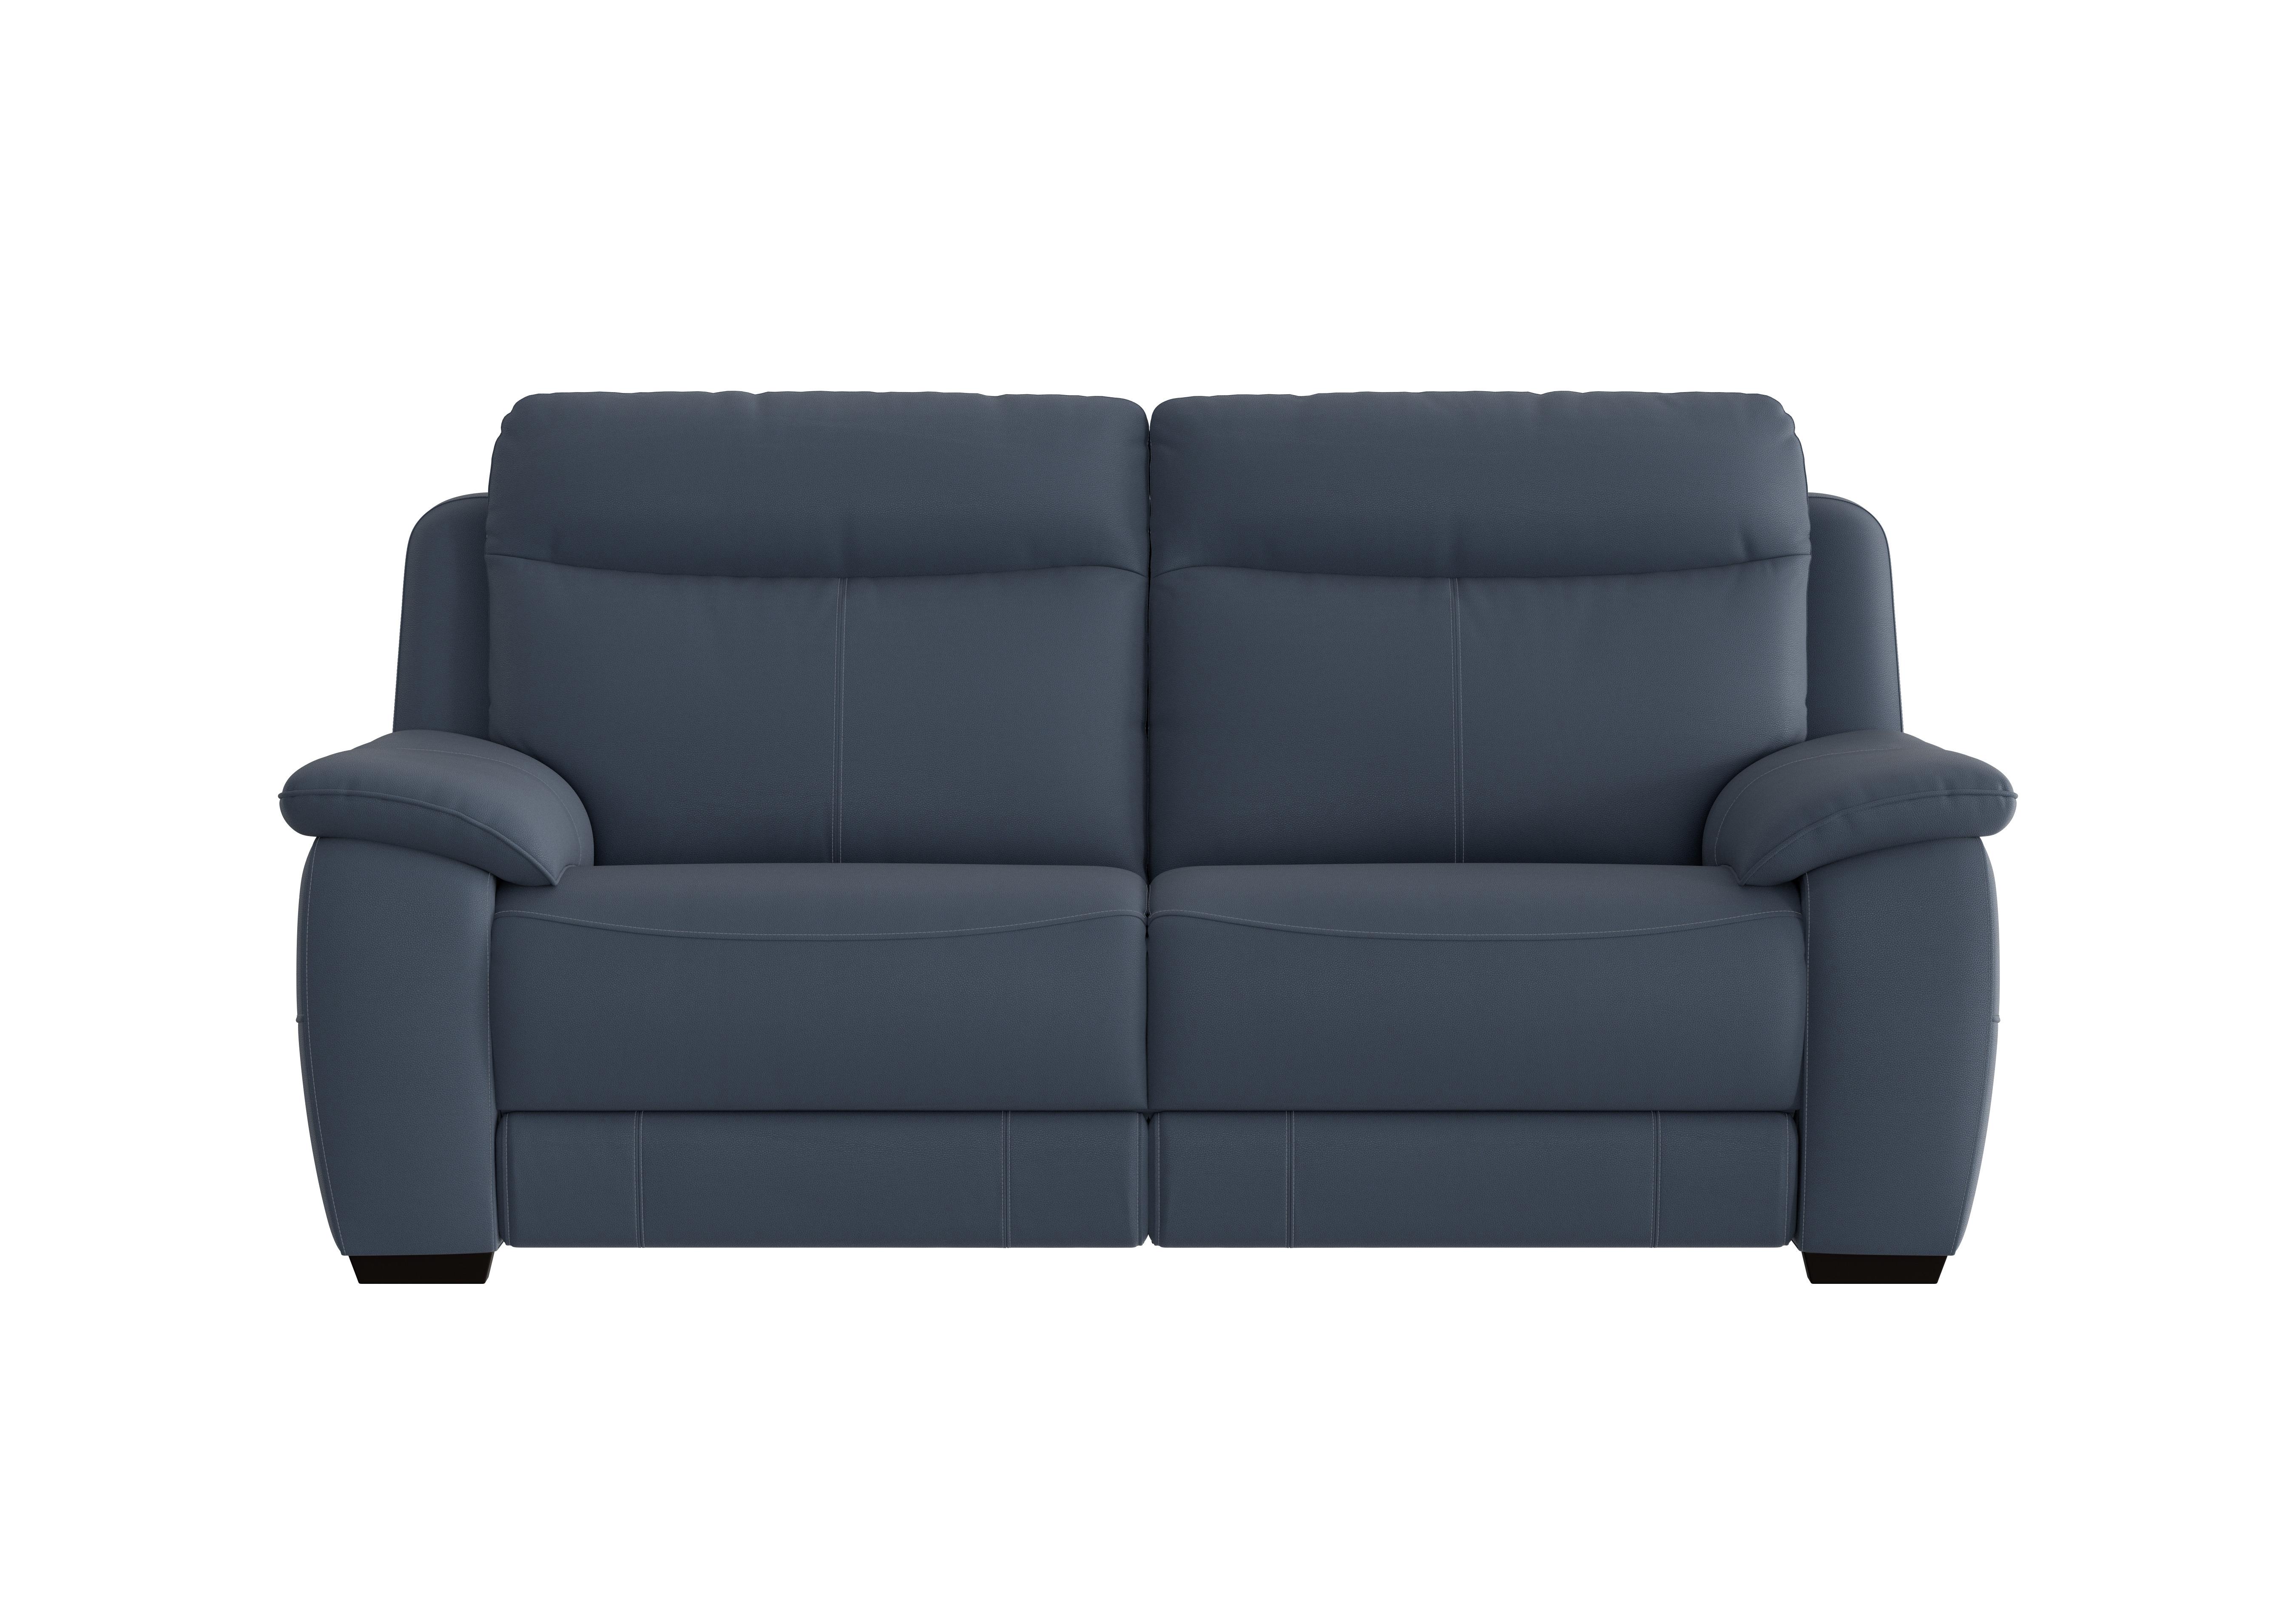 Starlight Express 3 Seater Leather Sofa in Hw-313e Ocean Blue on Furniture Village